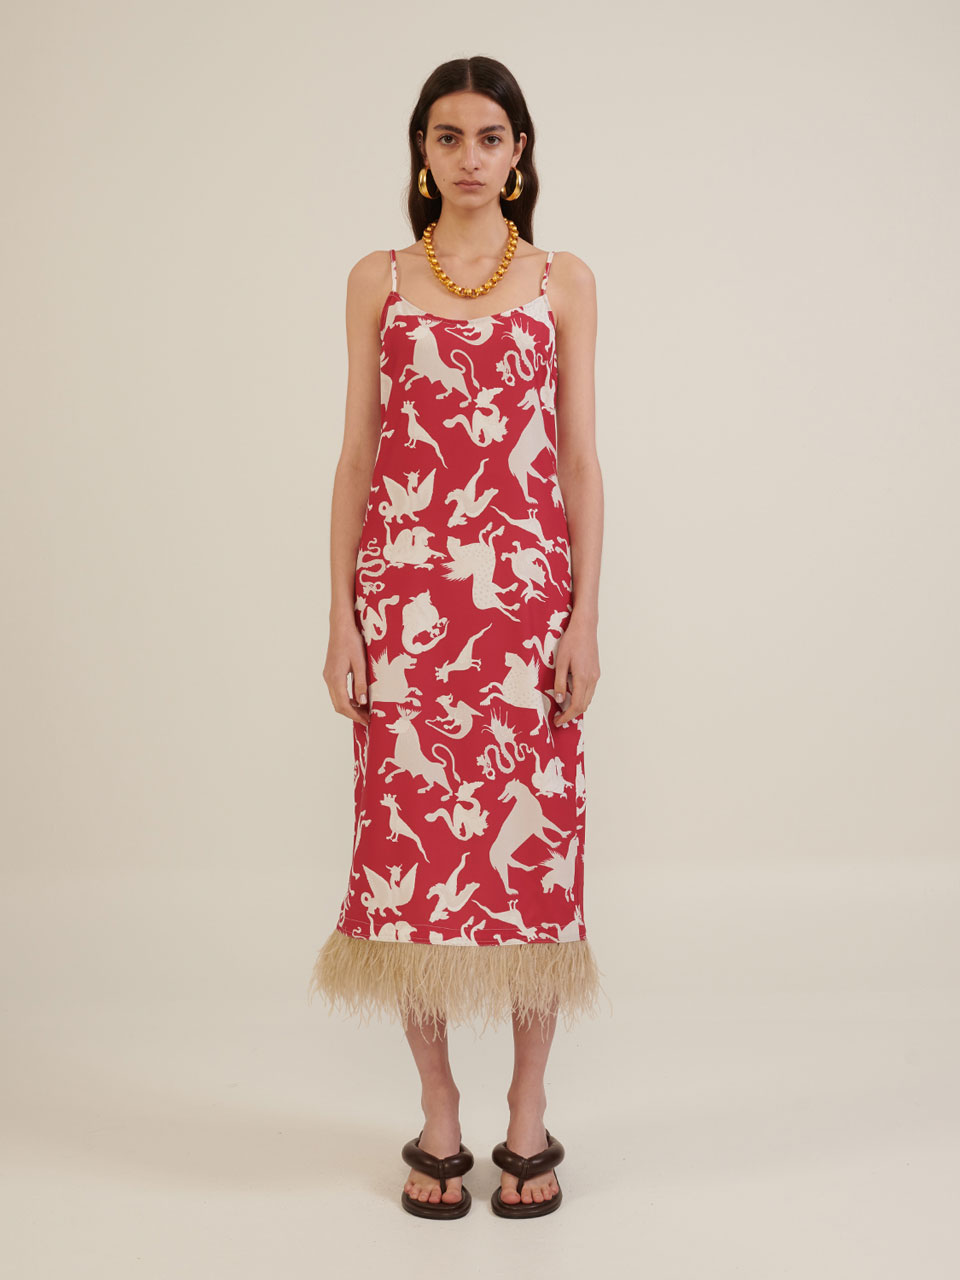 Milkwhite-Printed-Slip-Dress-With-Feathers